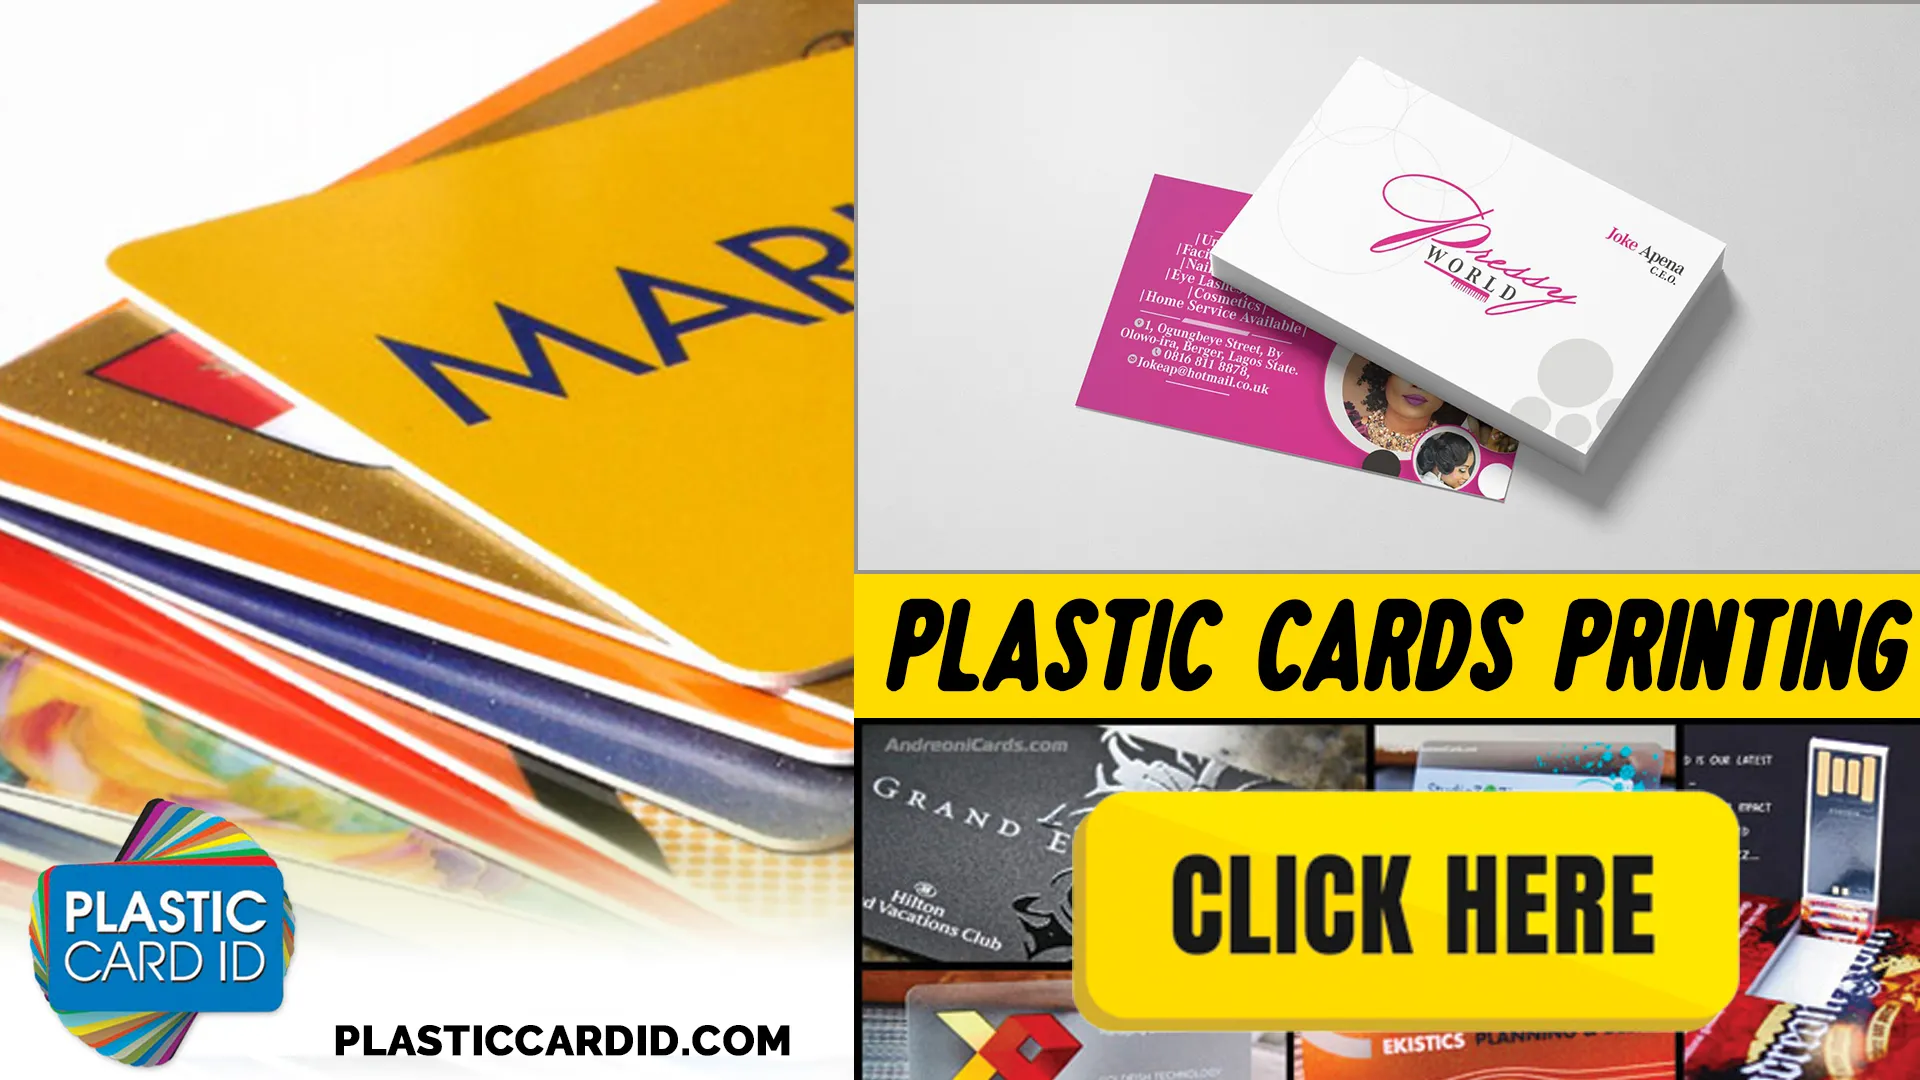 The Industry-Leading Plastic Card Printers of Plastic Card ID
